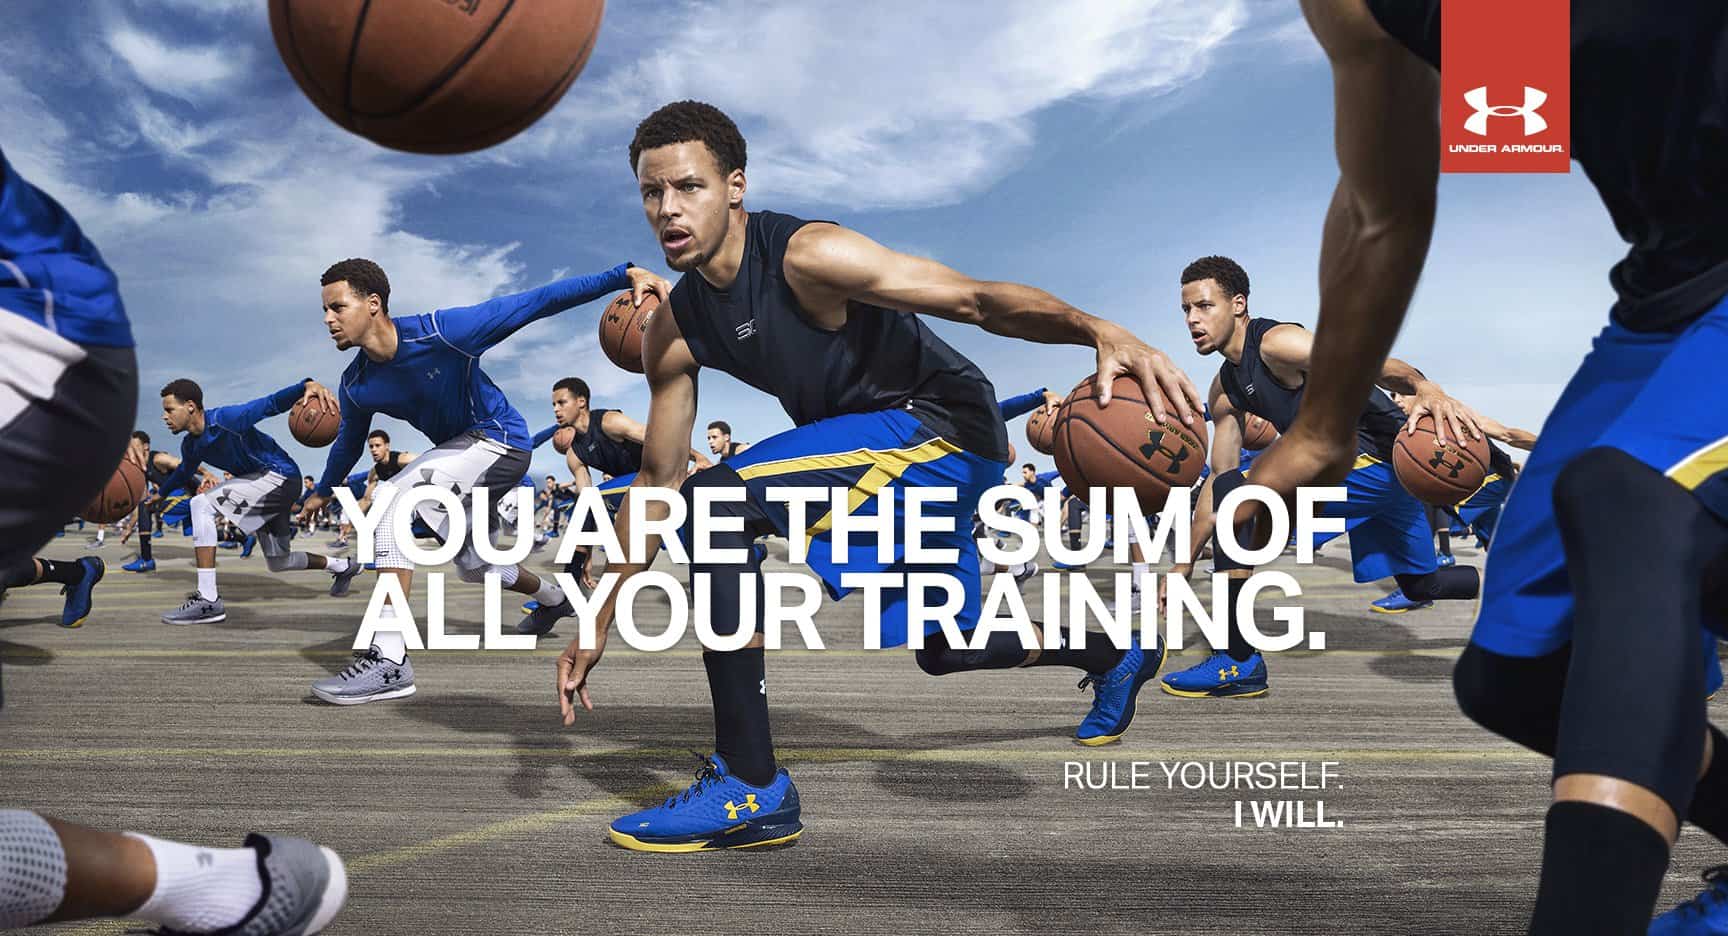 Under Armour Motivational Quotes Our Top 10 Wild Child Sports